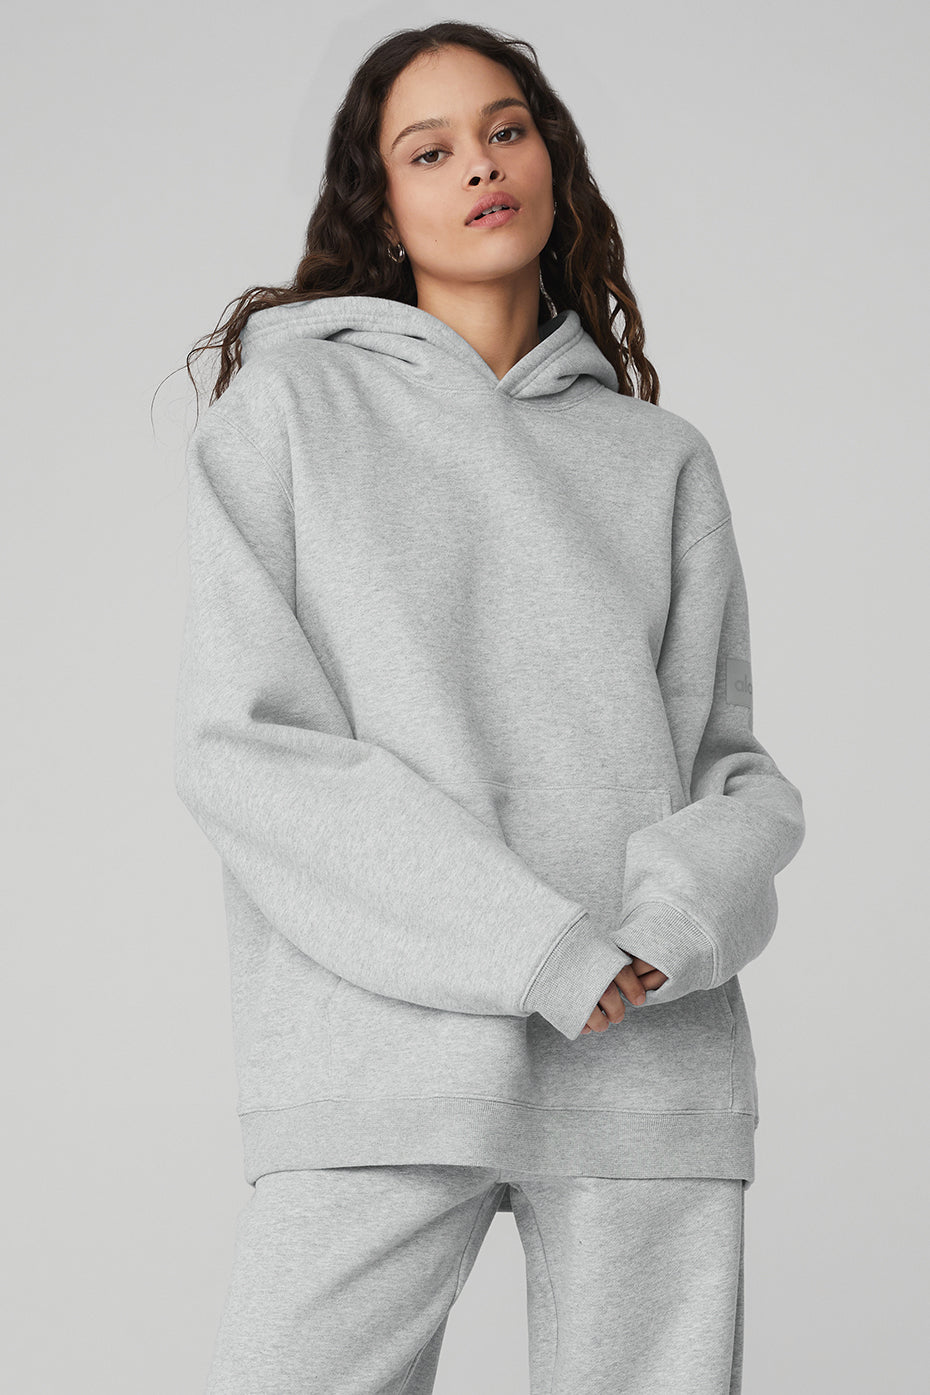 Renown Heavy Weight Hoodie Athletic Heather Grey Alo Yoga, 47% OFF